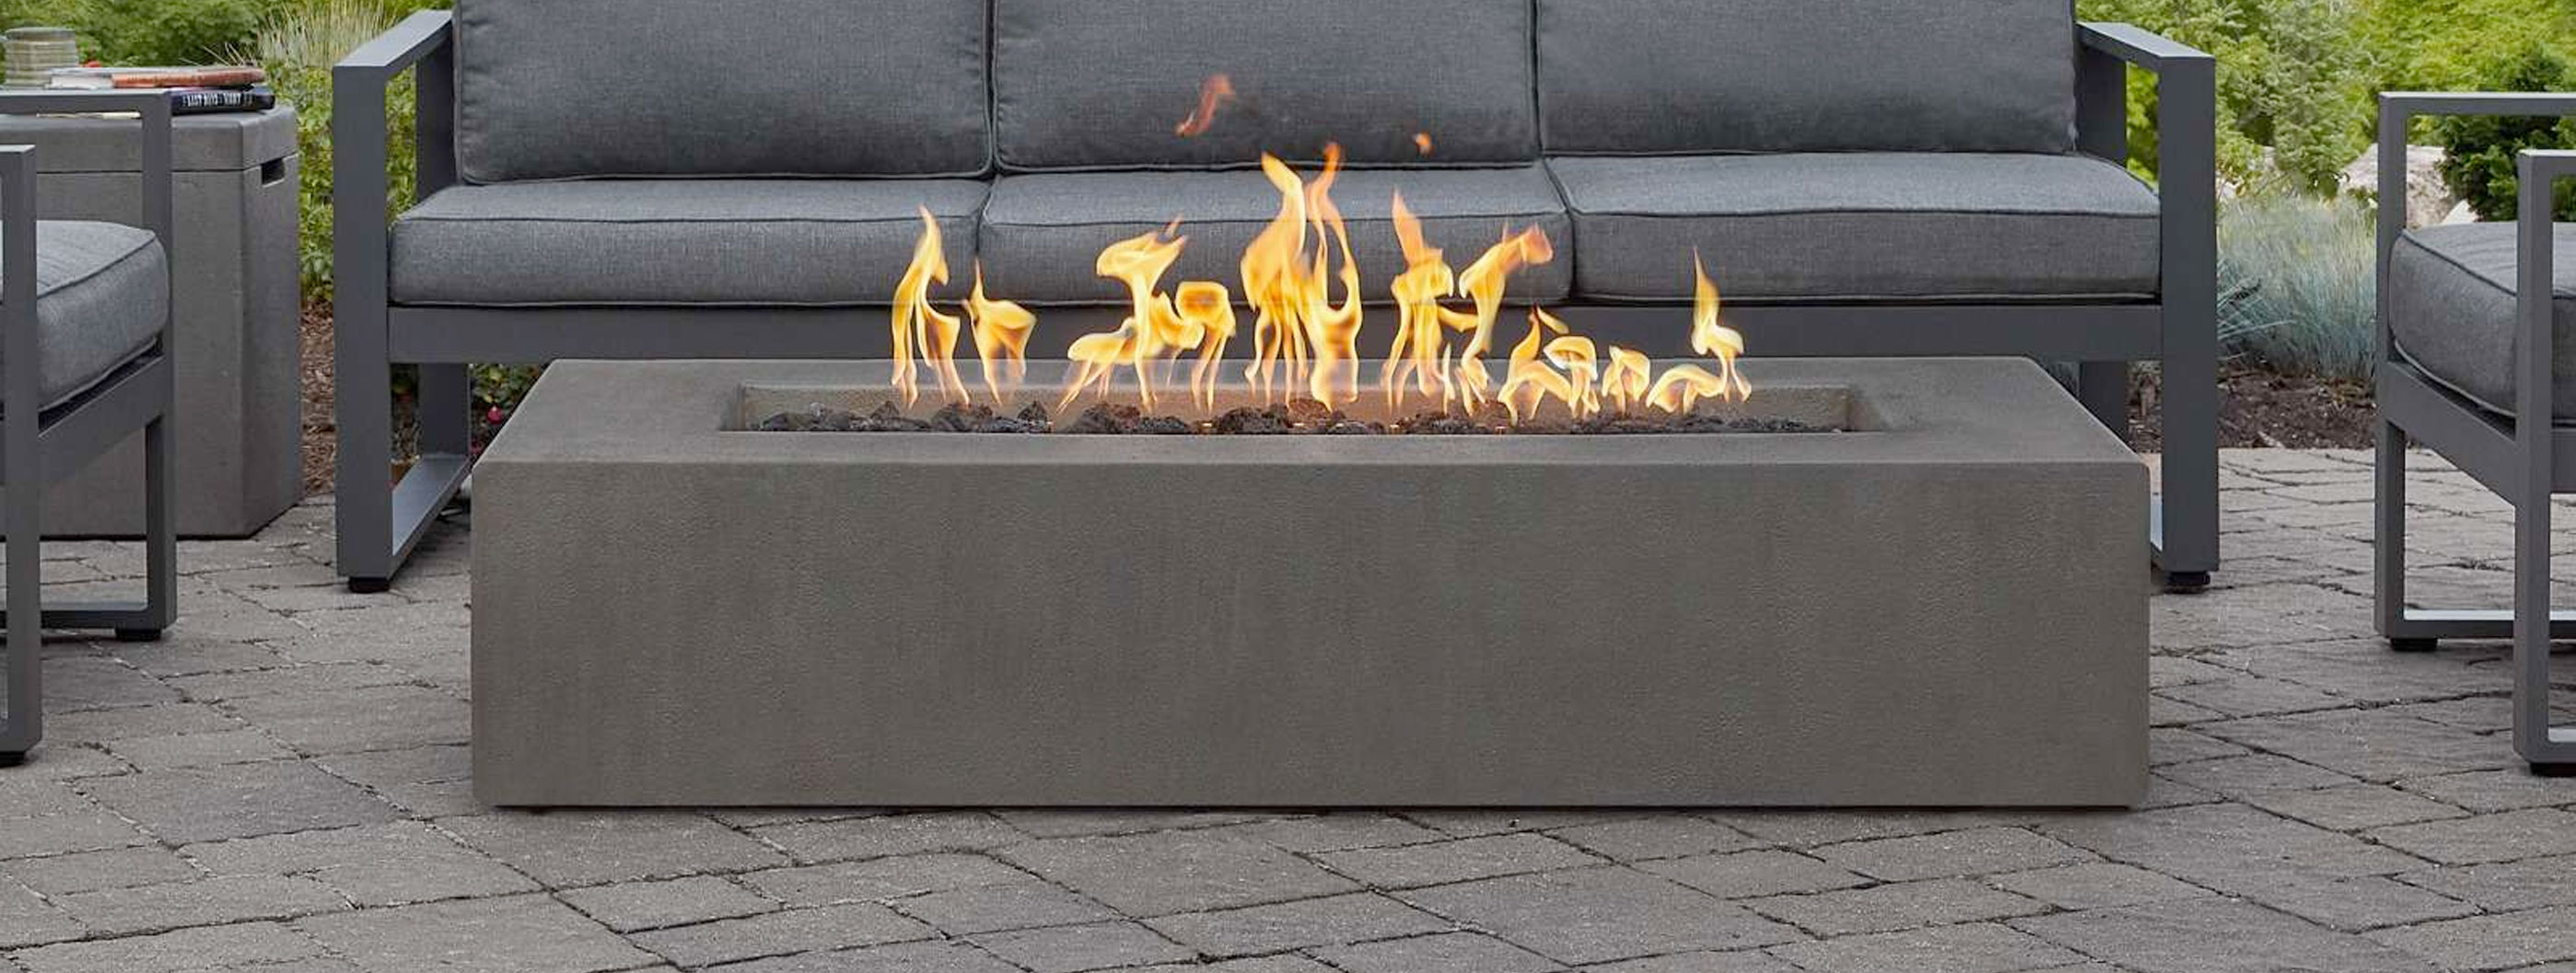 Estes Fire Pits & Tables Collection by Jensen Company